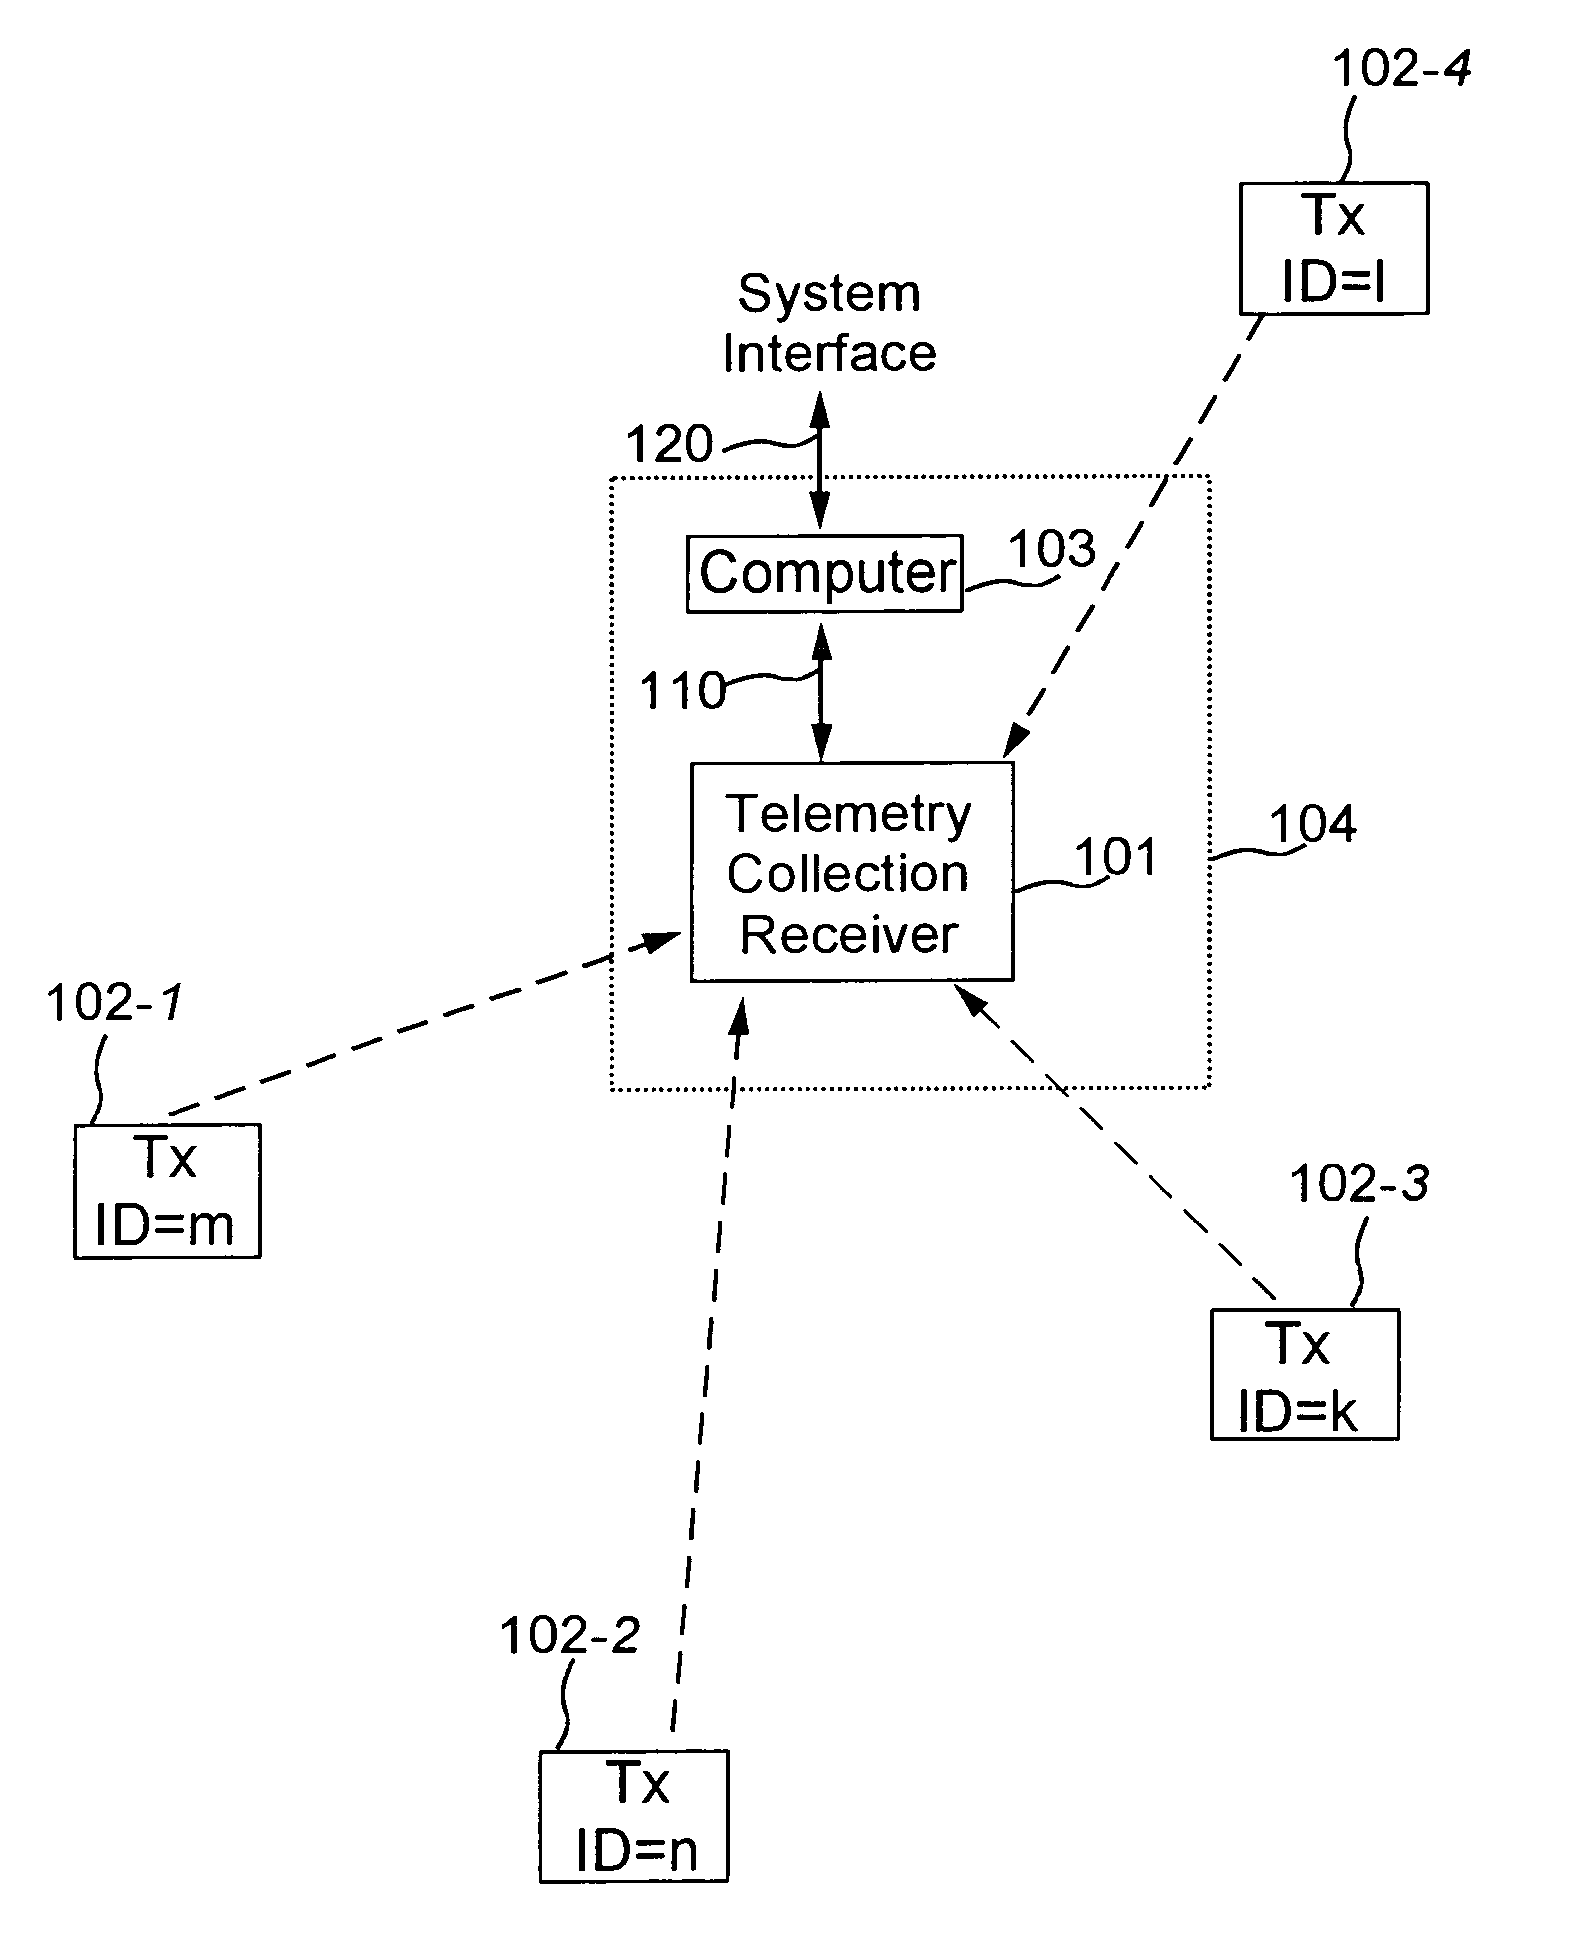 Overhead reduction in frequency hopping system for intermittent transmission